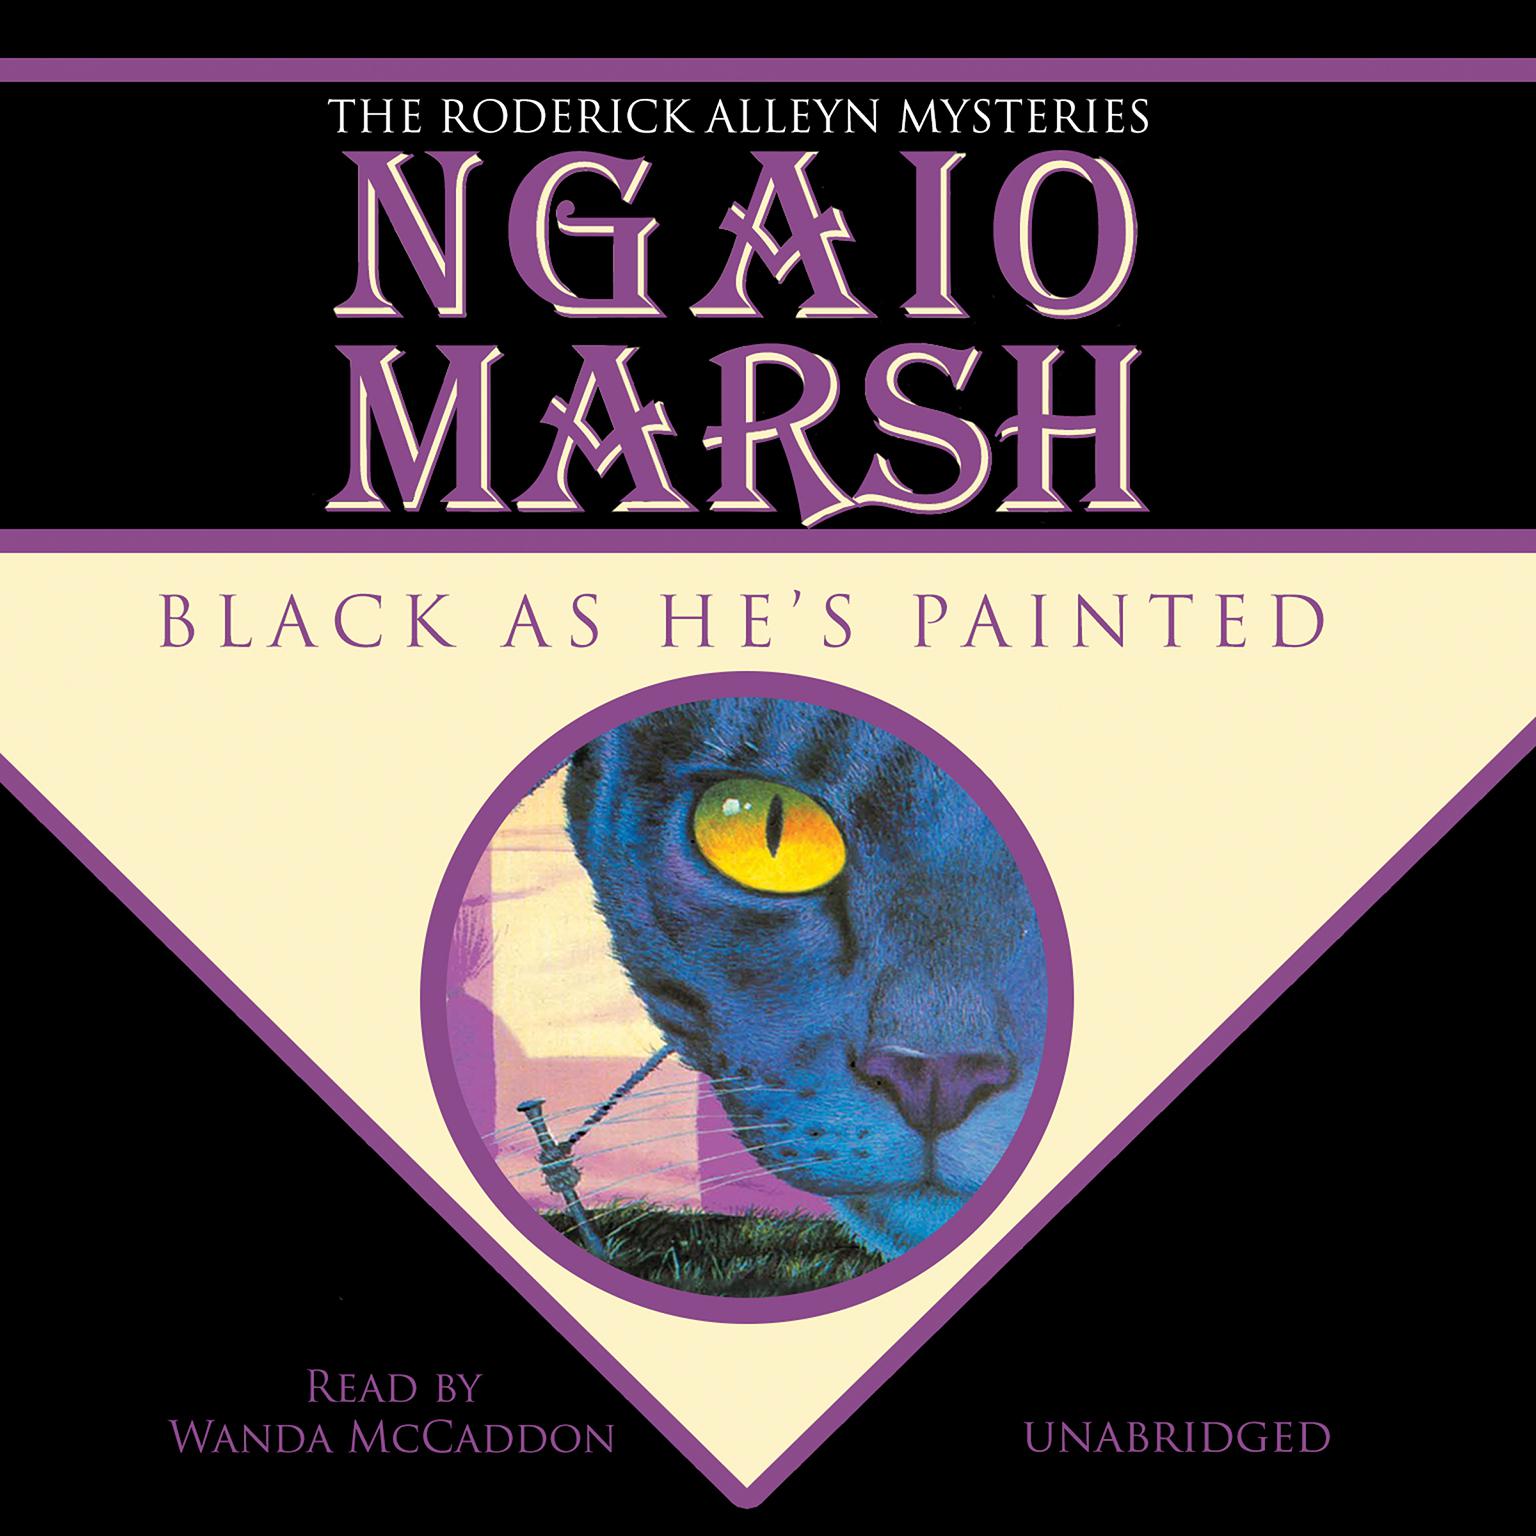 Black as He’s Painted Audiobook, by Ngaio Marsh